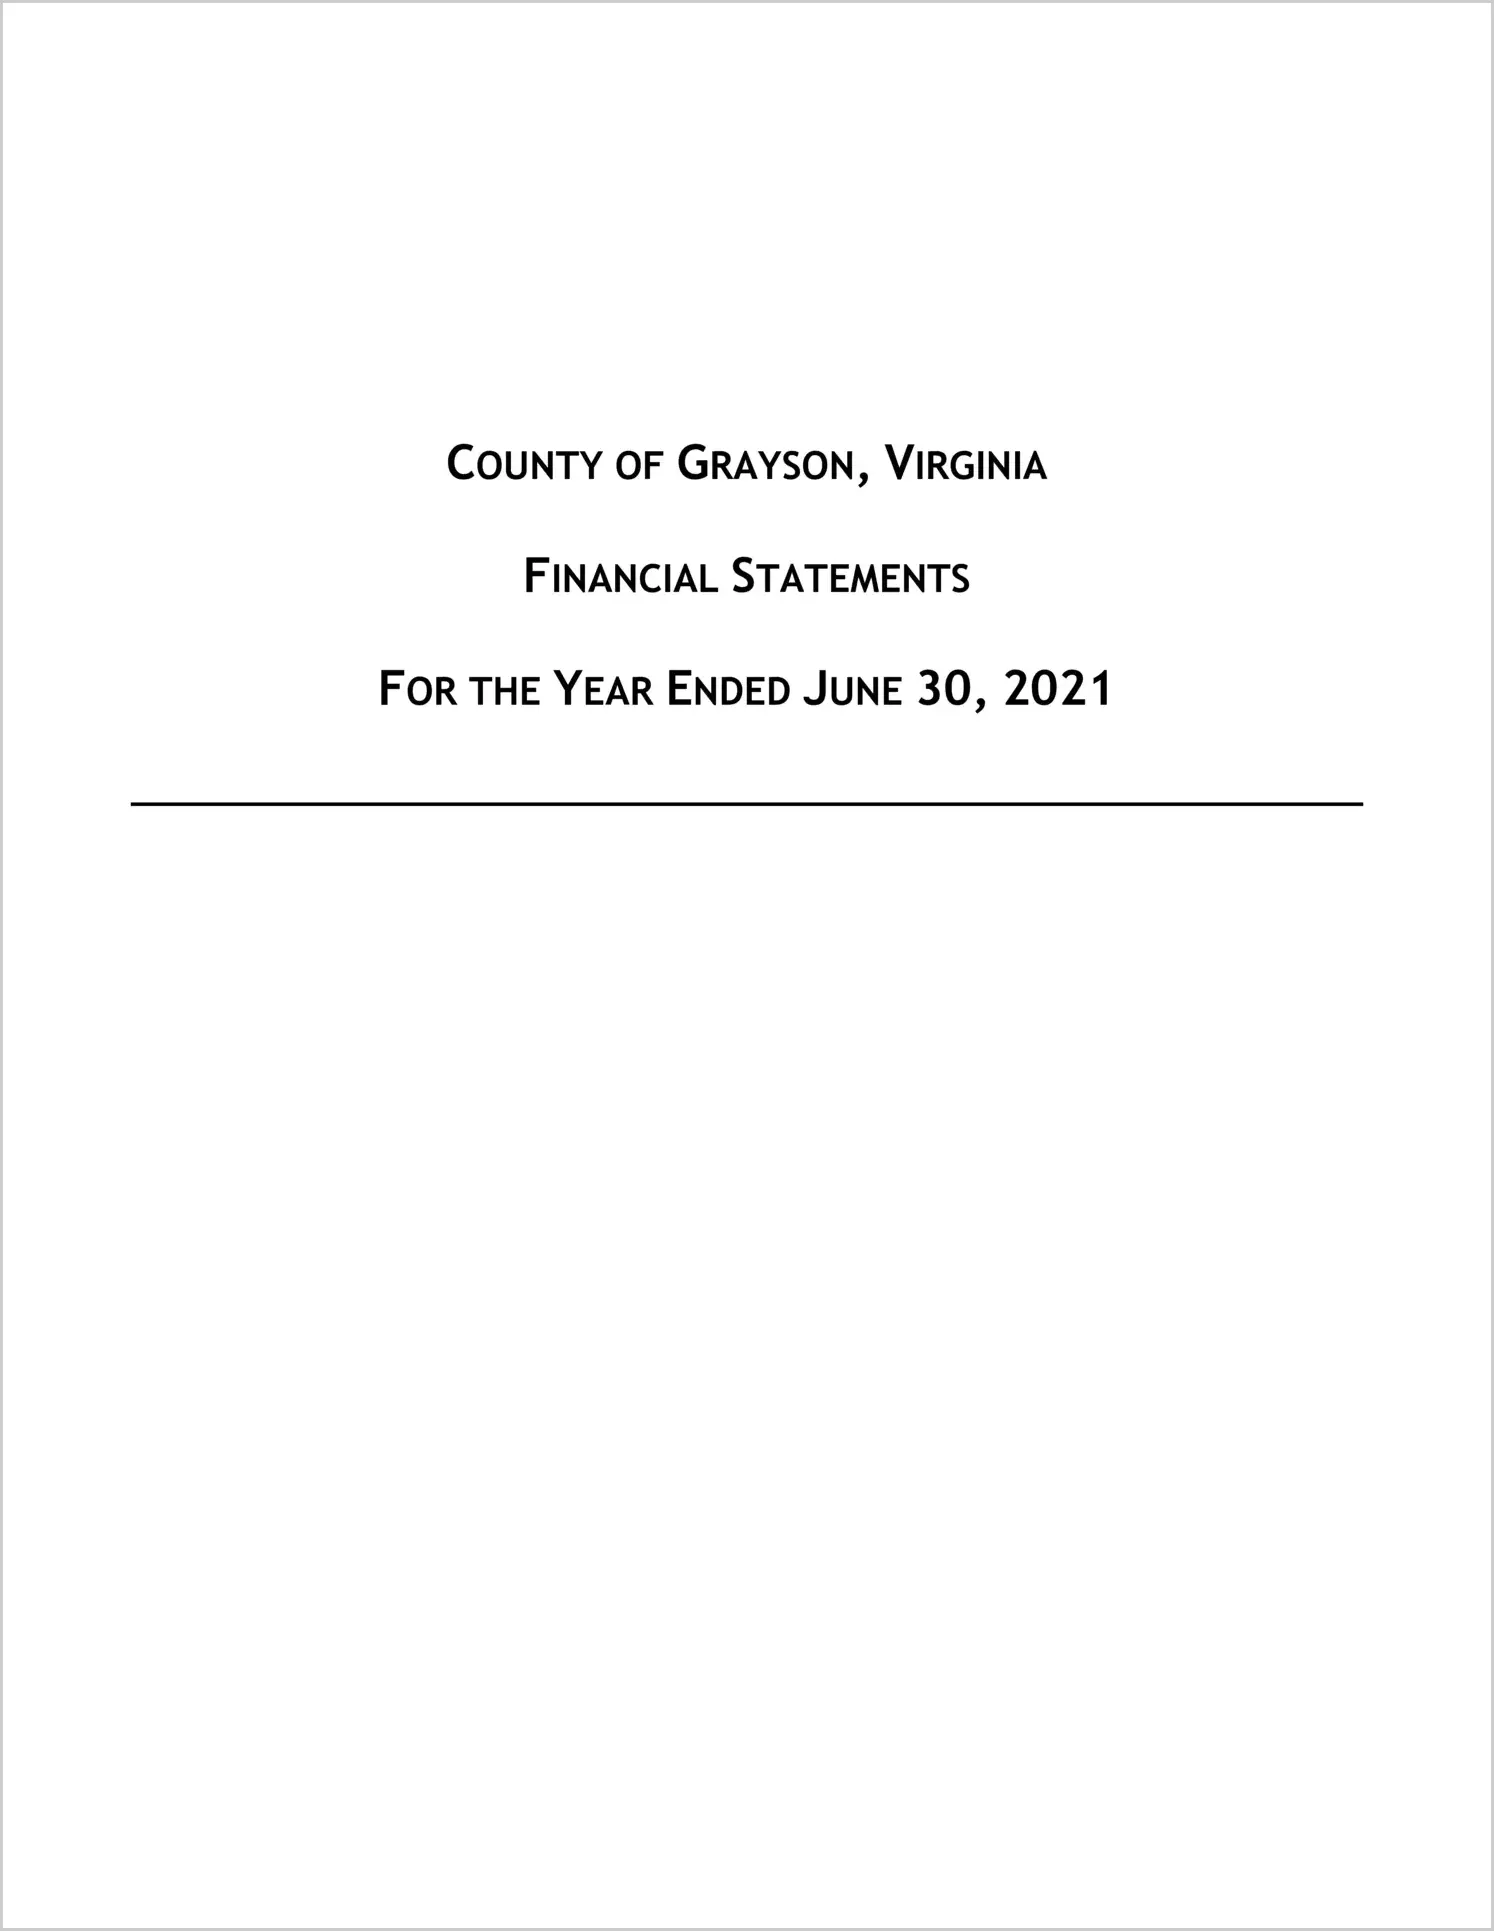 2021 Annual Financial Report for County of Grayson